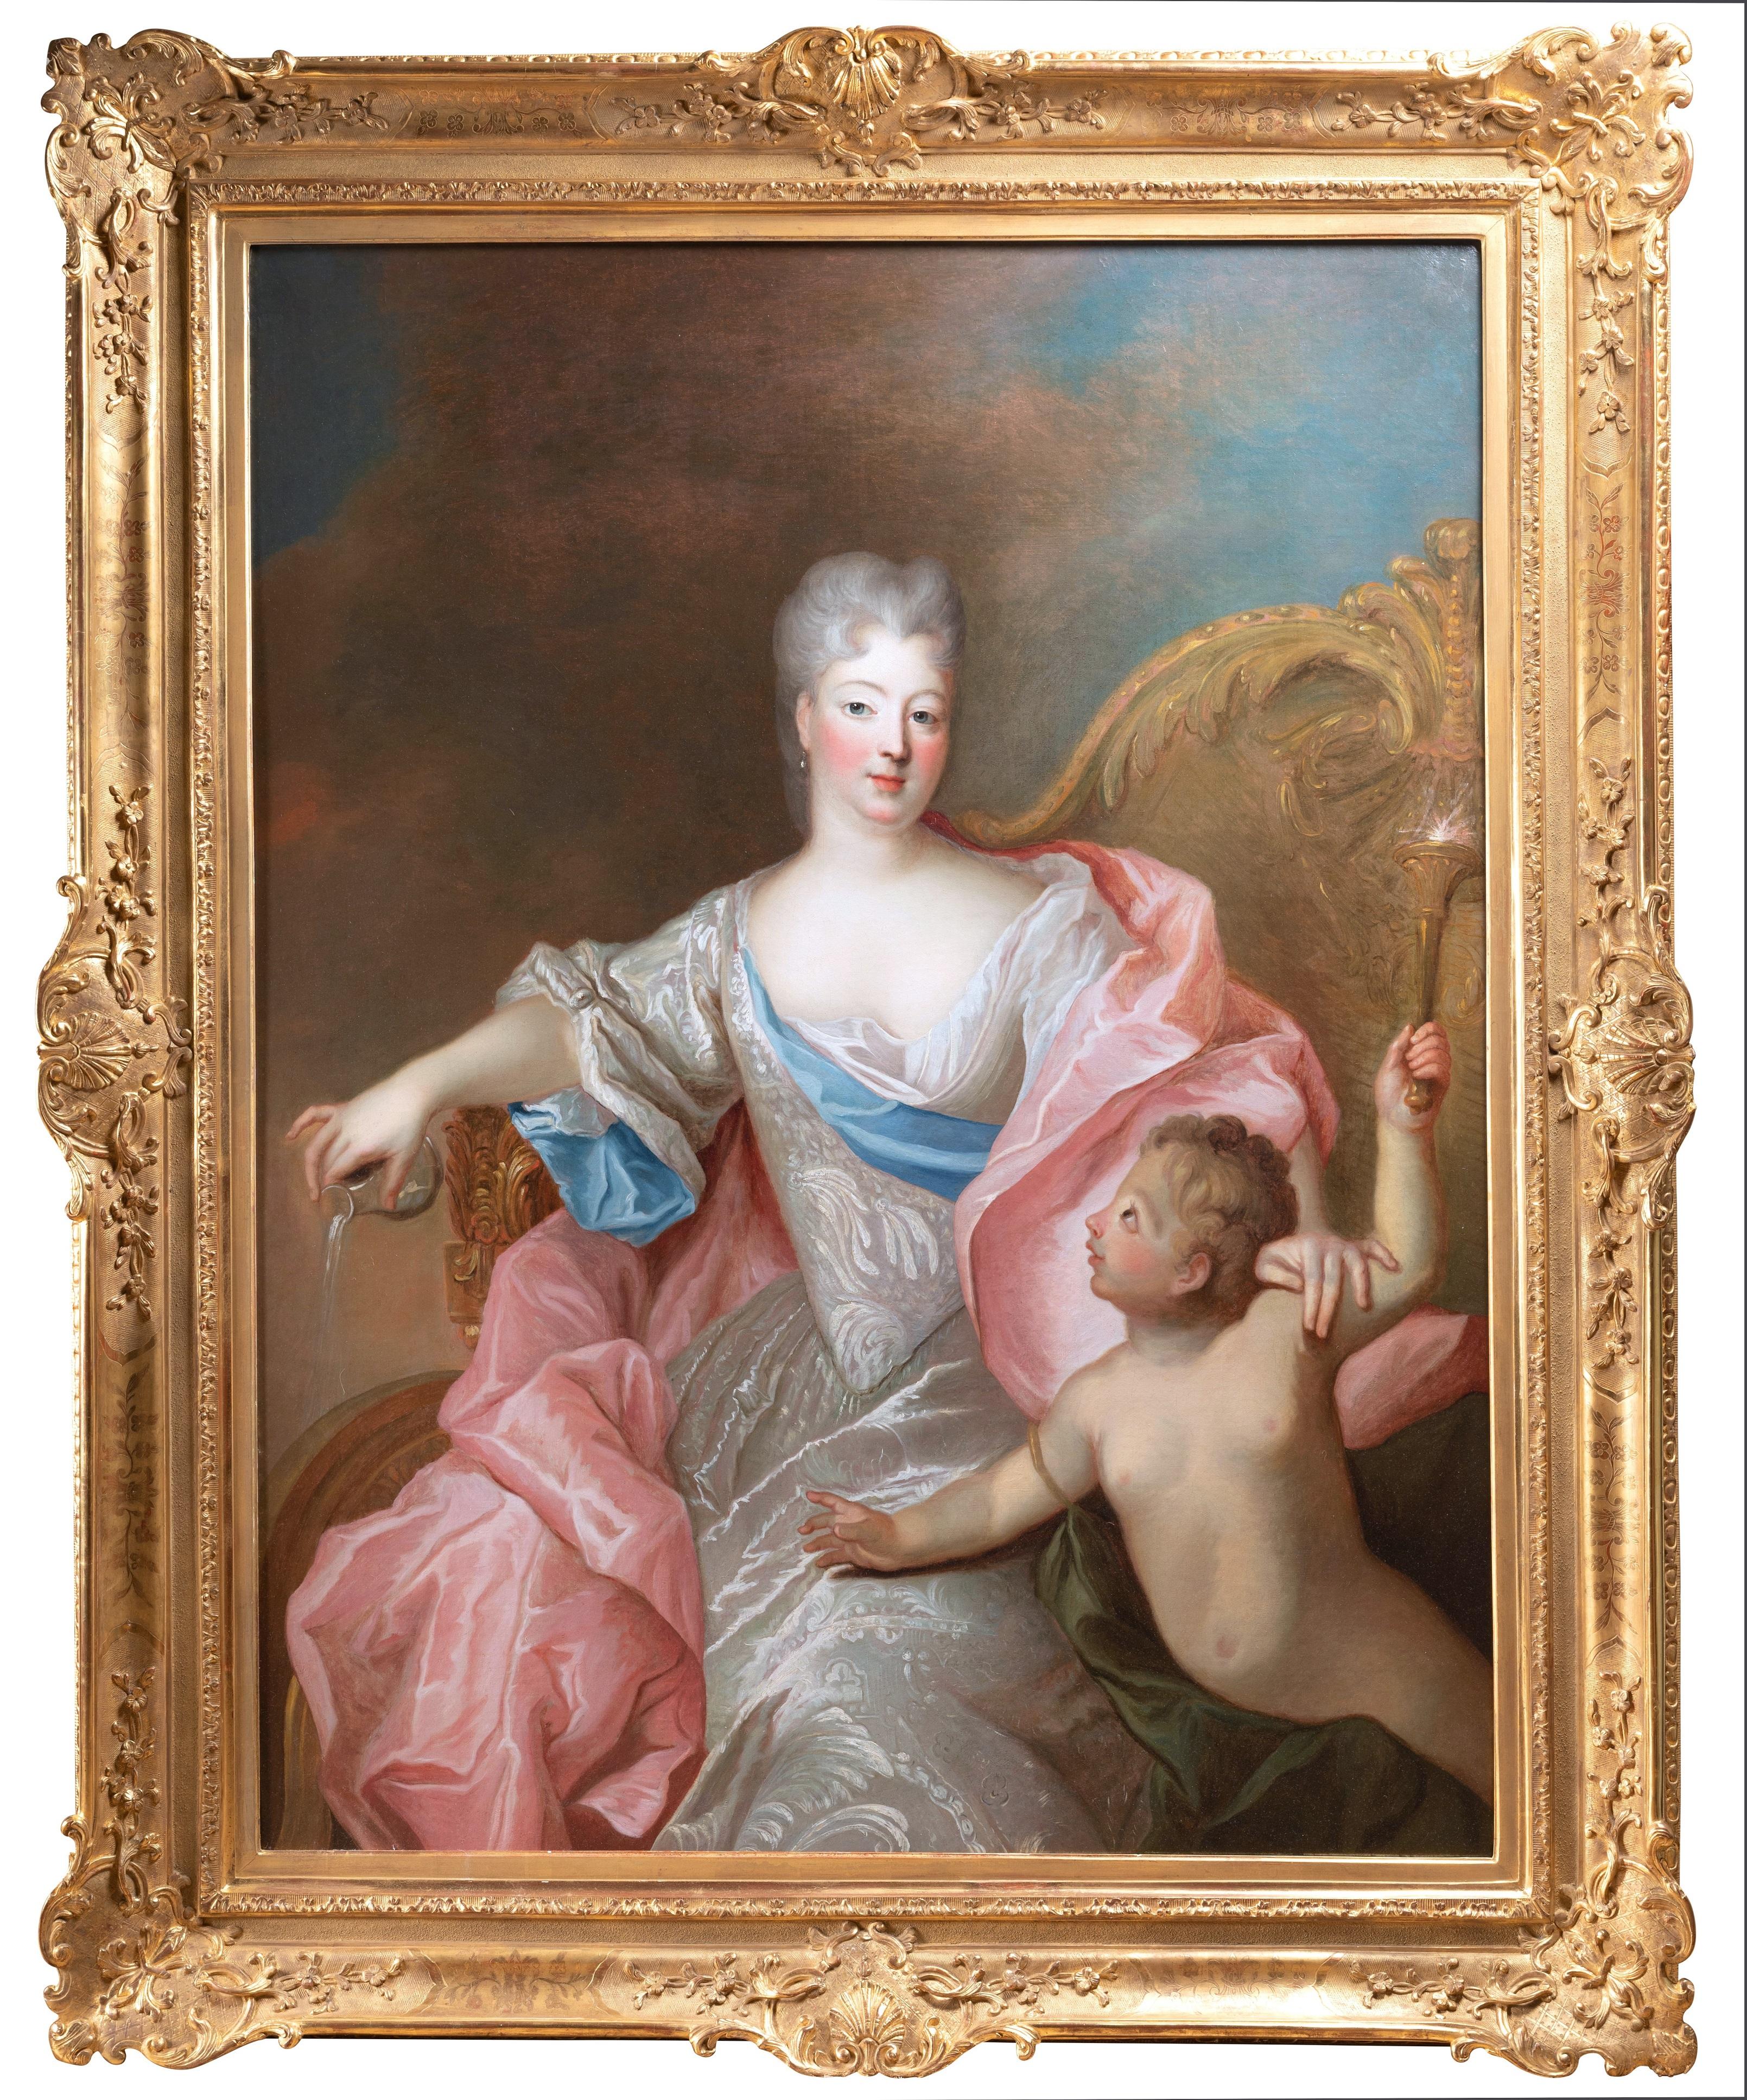 Portrait of a Lady as Venus
ATTRIBUTED TO PIERRE GOBERT (1662-1744)
FRENCH SCHOOL AROUND 1720
OIL ON CANVAS: H. 55.51 in, W. 42.91 in.
IMPORTANT 18TH CENTURY GILTWOOD FRAME (RE-GILT)
FRAMED DIMENSIONS: H. 68.9 in, W. 55.91 in
Provenance :
Drouot